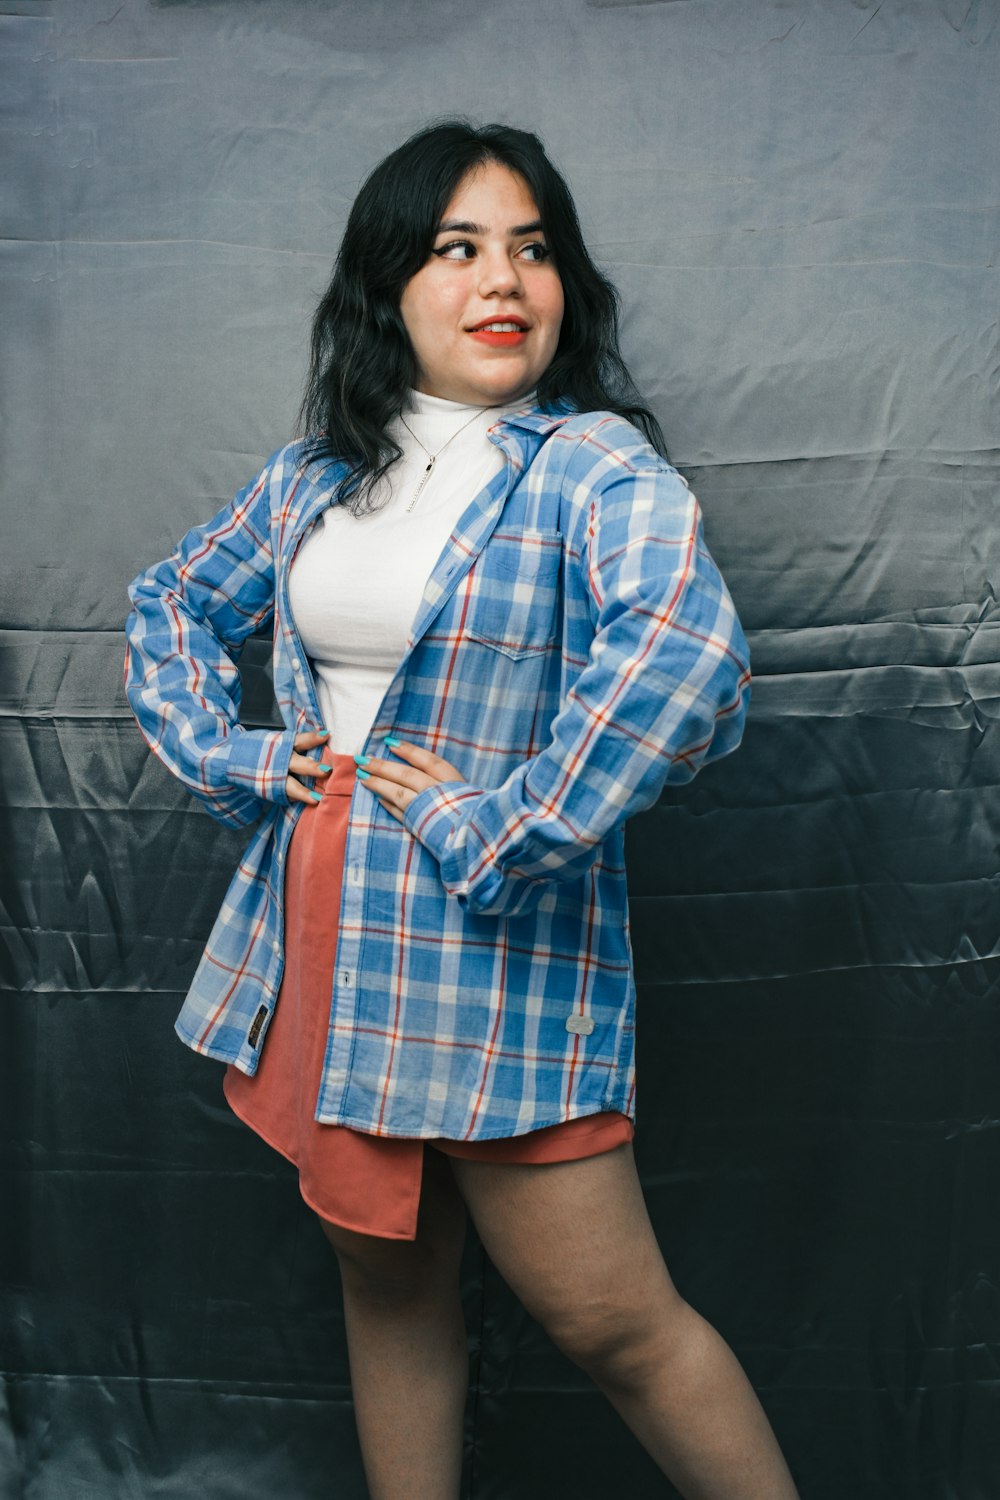 woman in white shirt and blue and white plaid coat